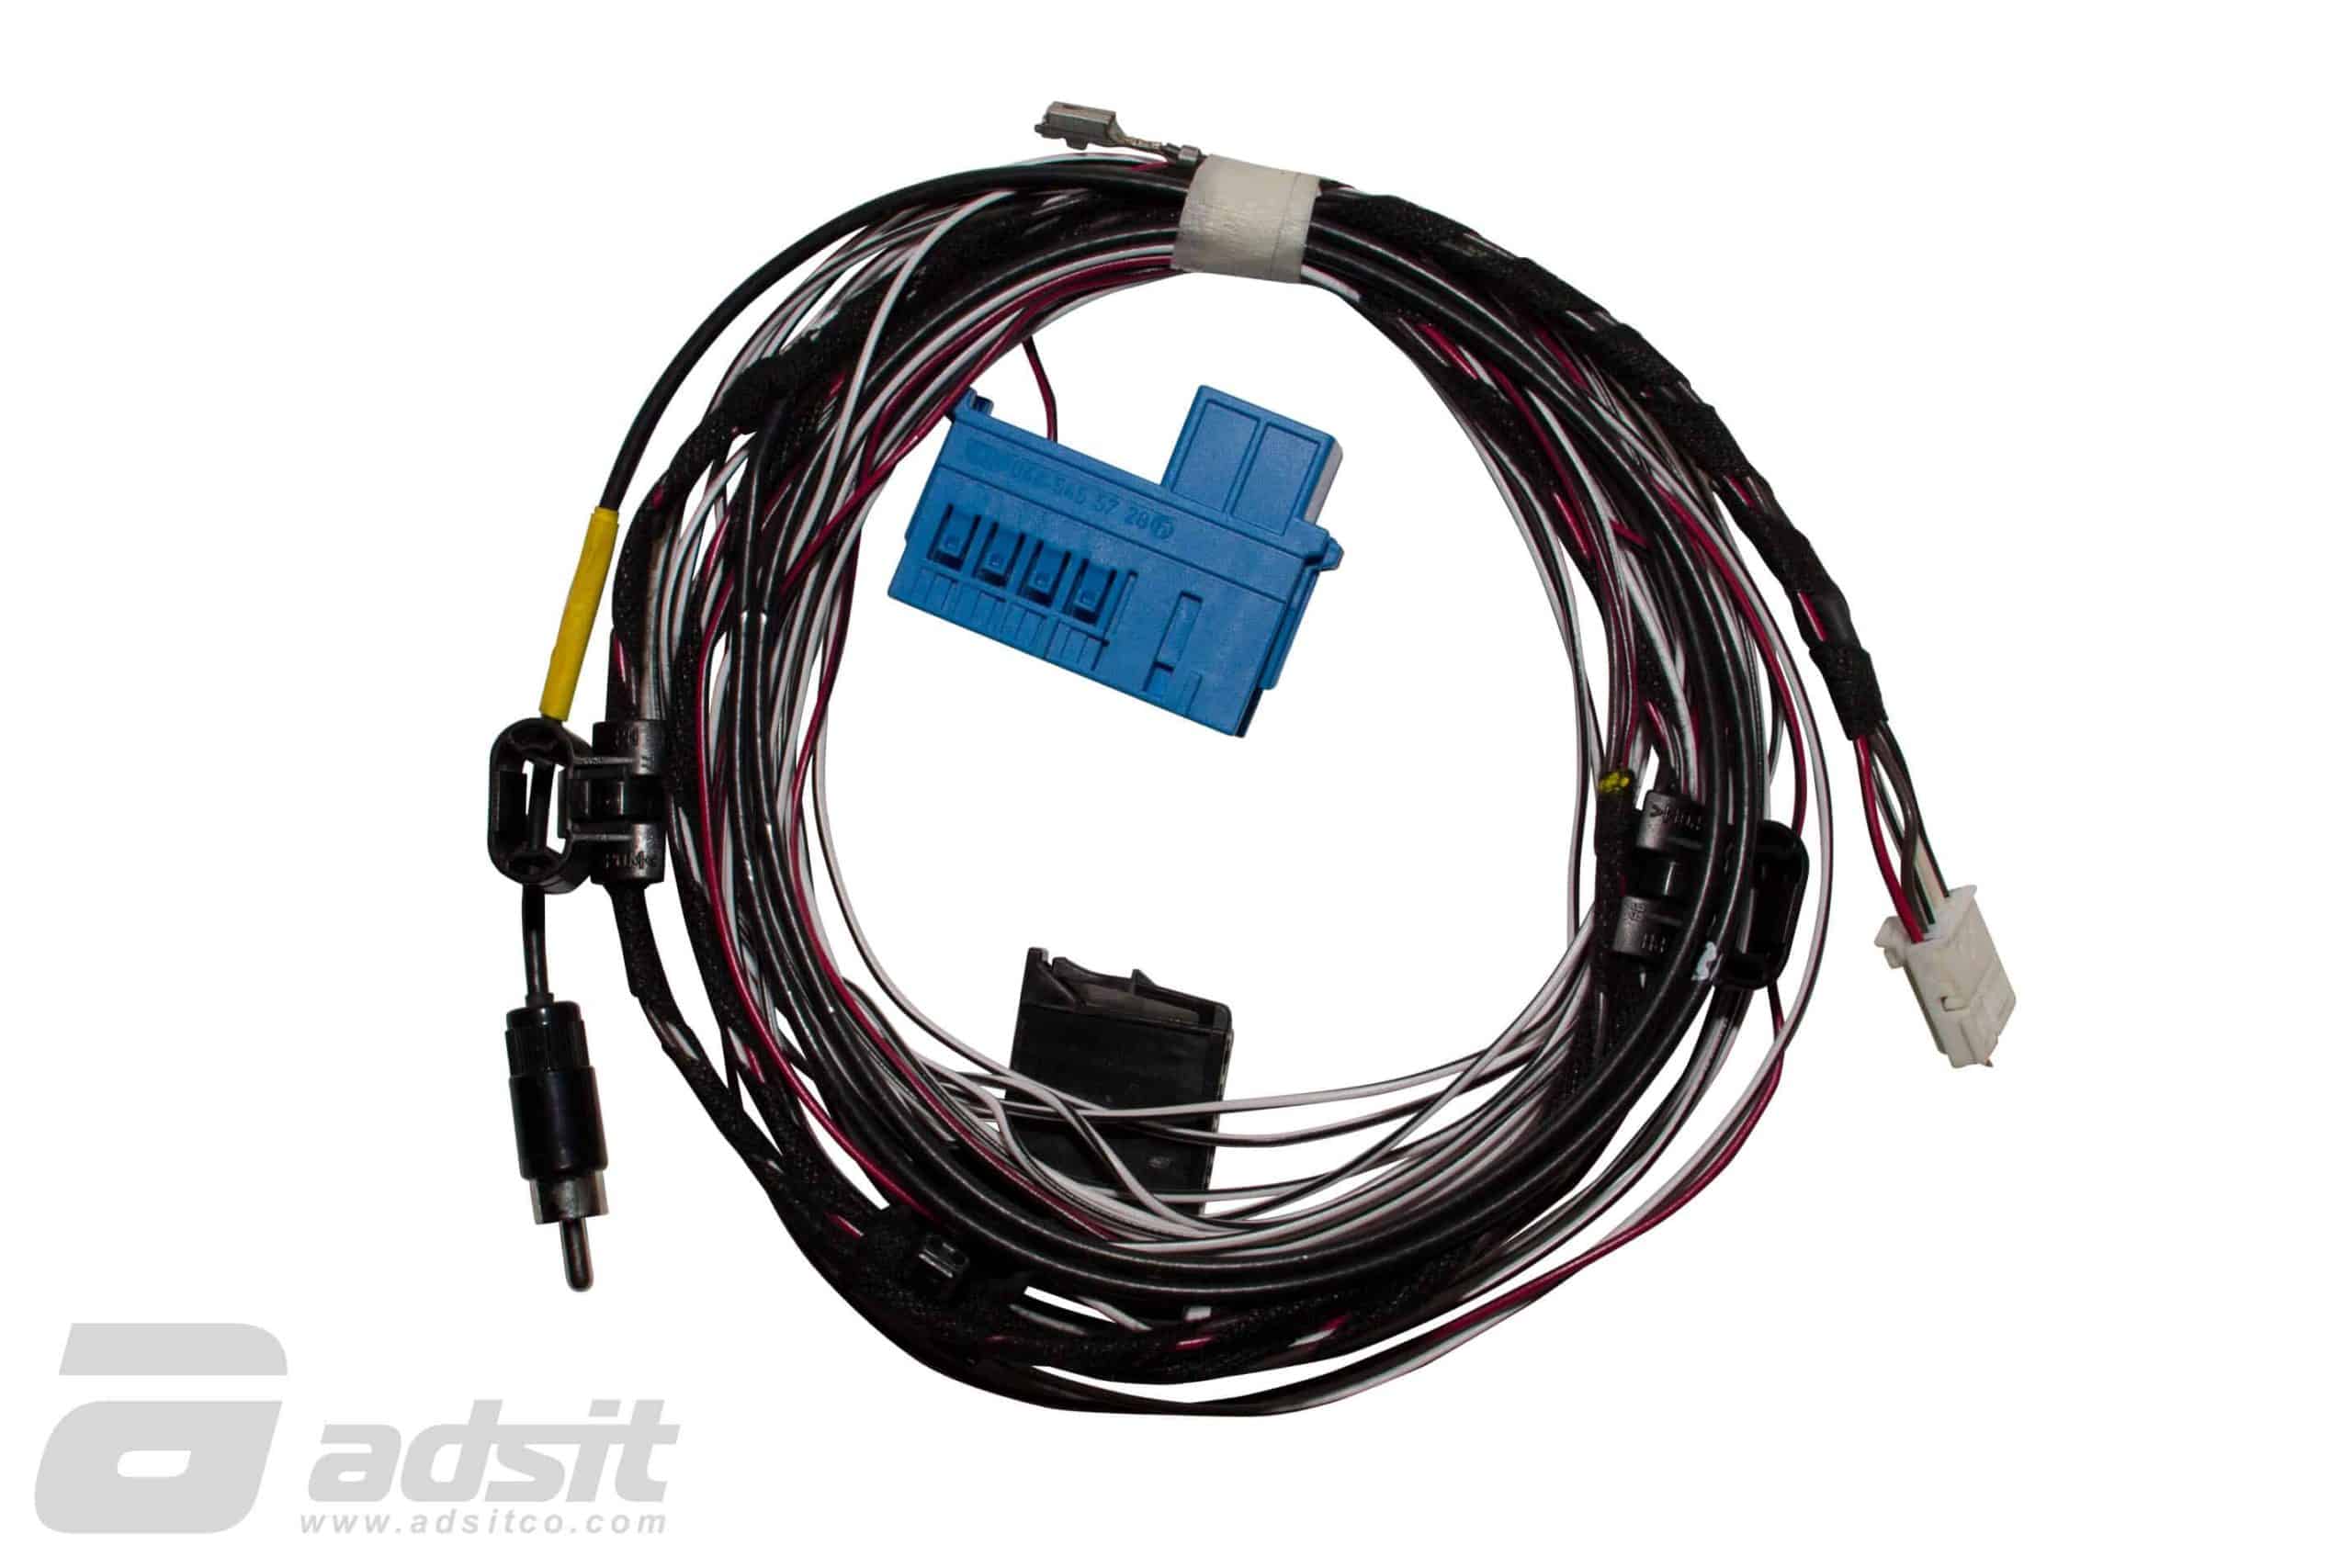 Rear View Camera Wiring Harness